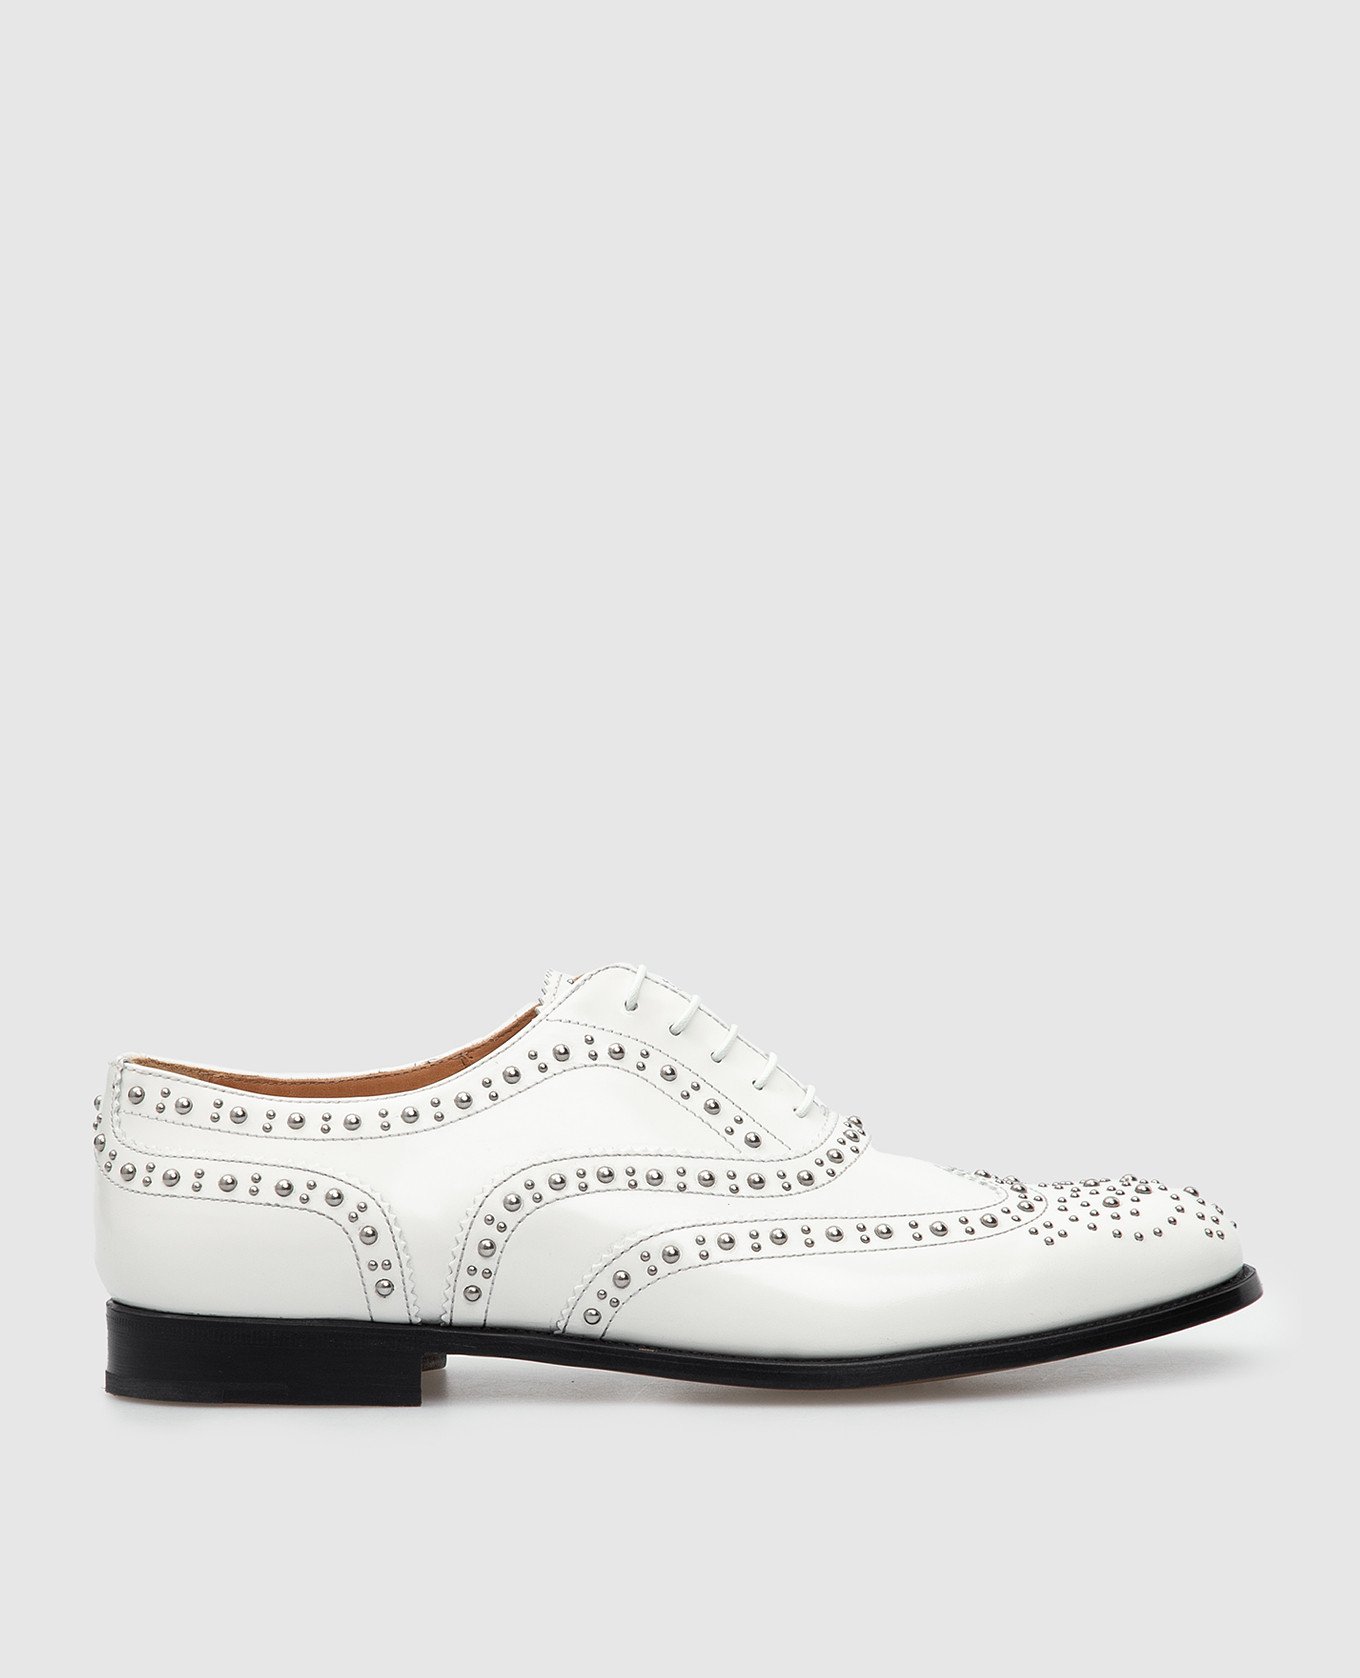 White leather oxford shoes